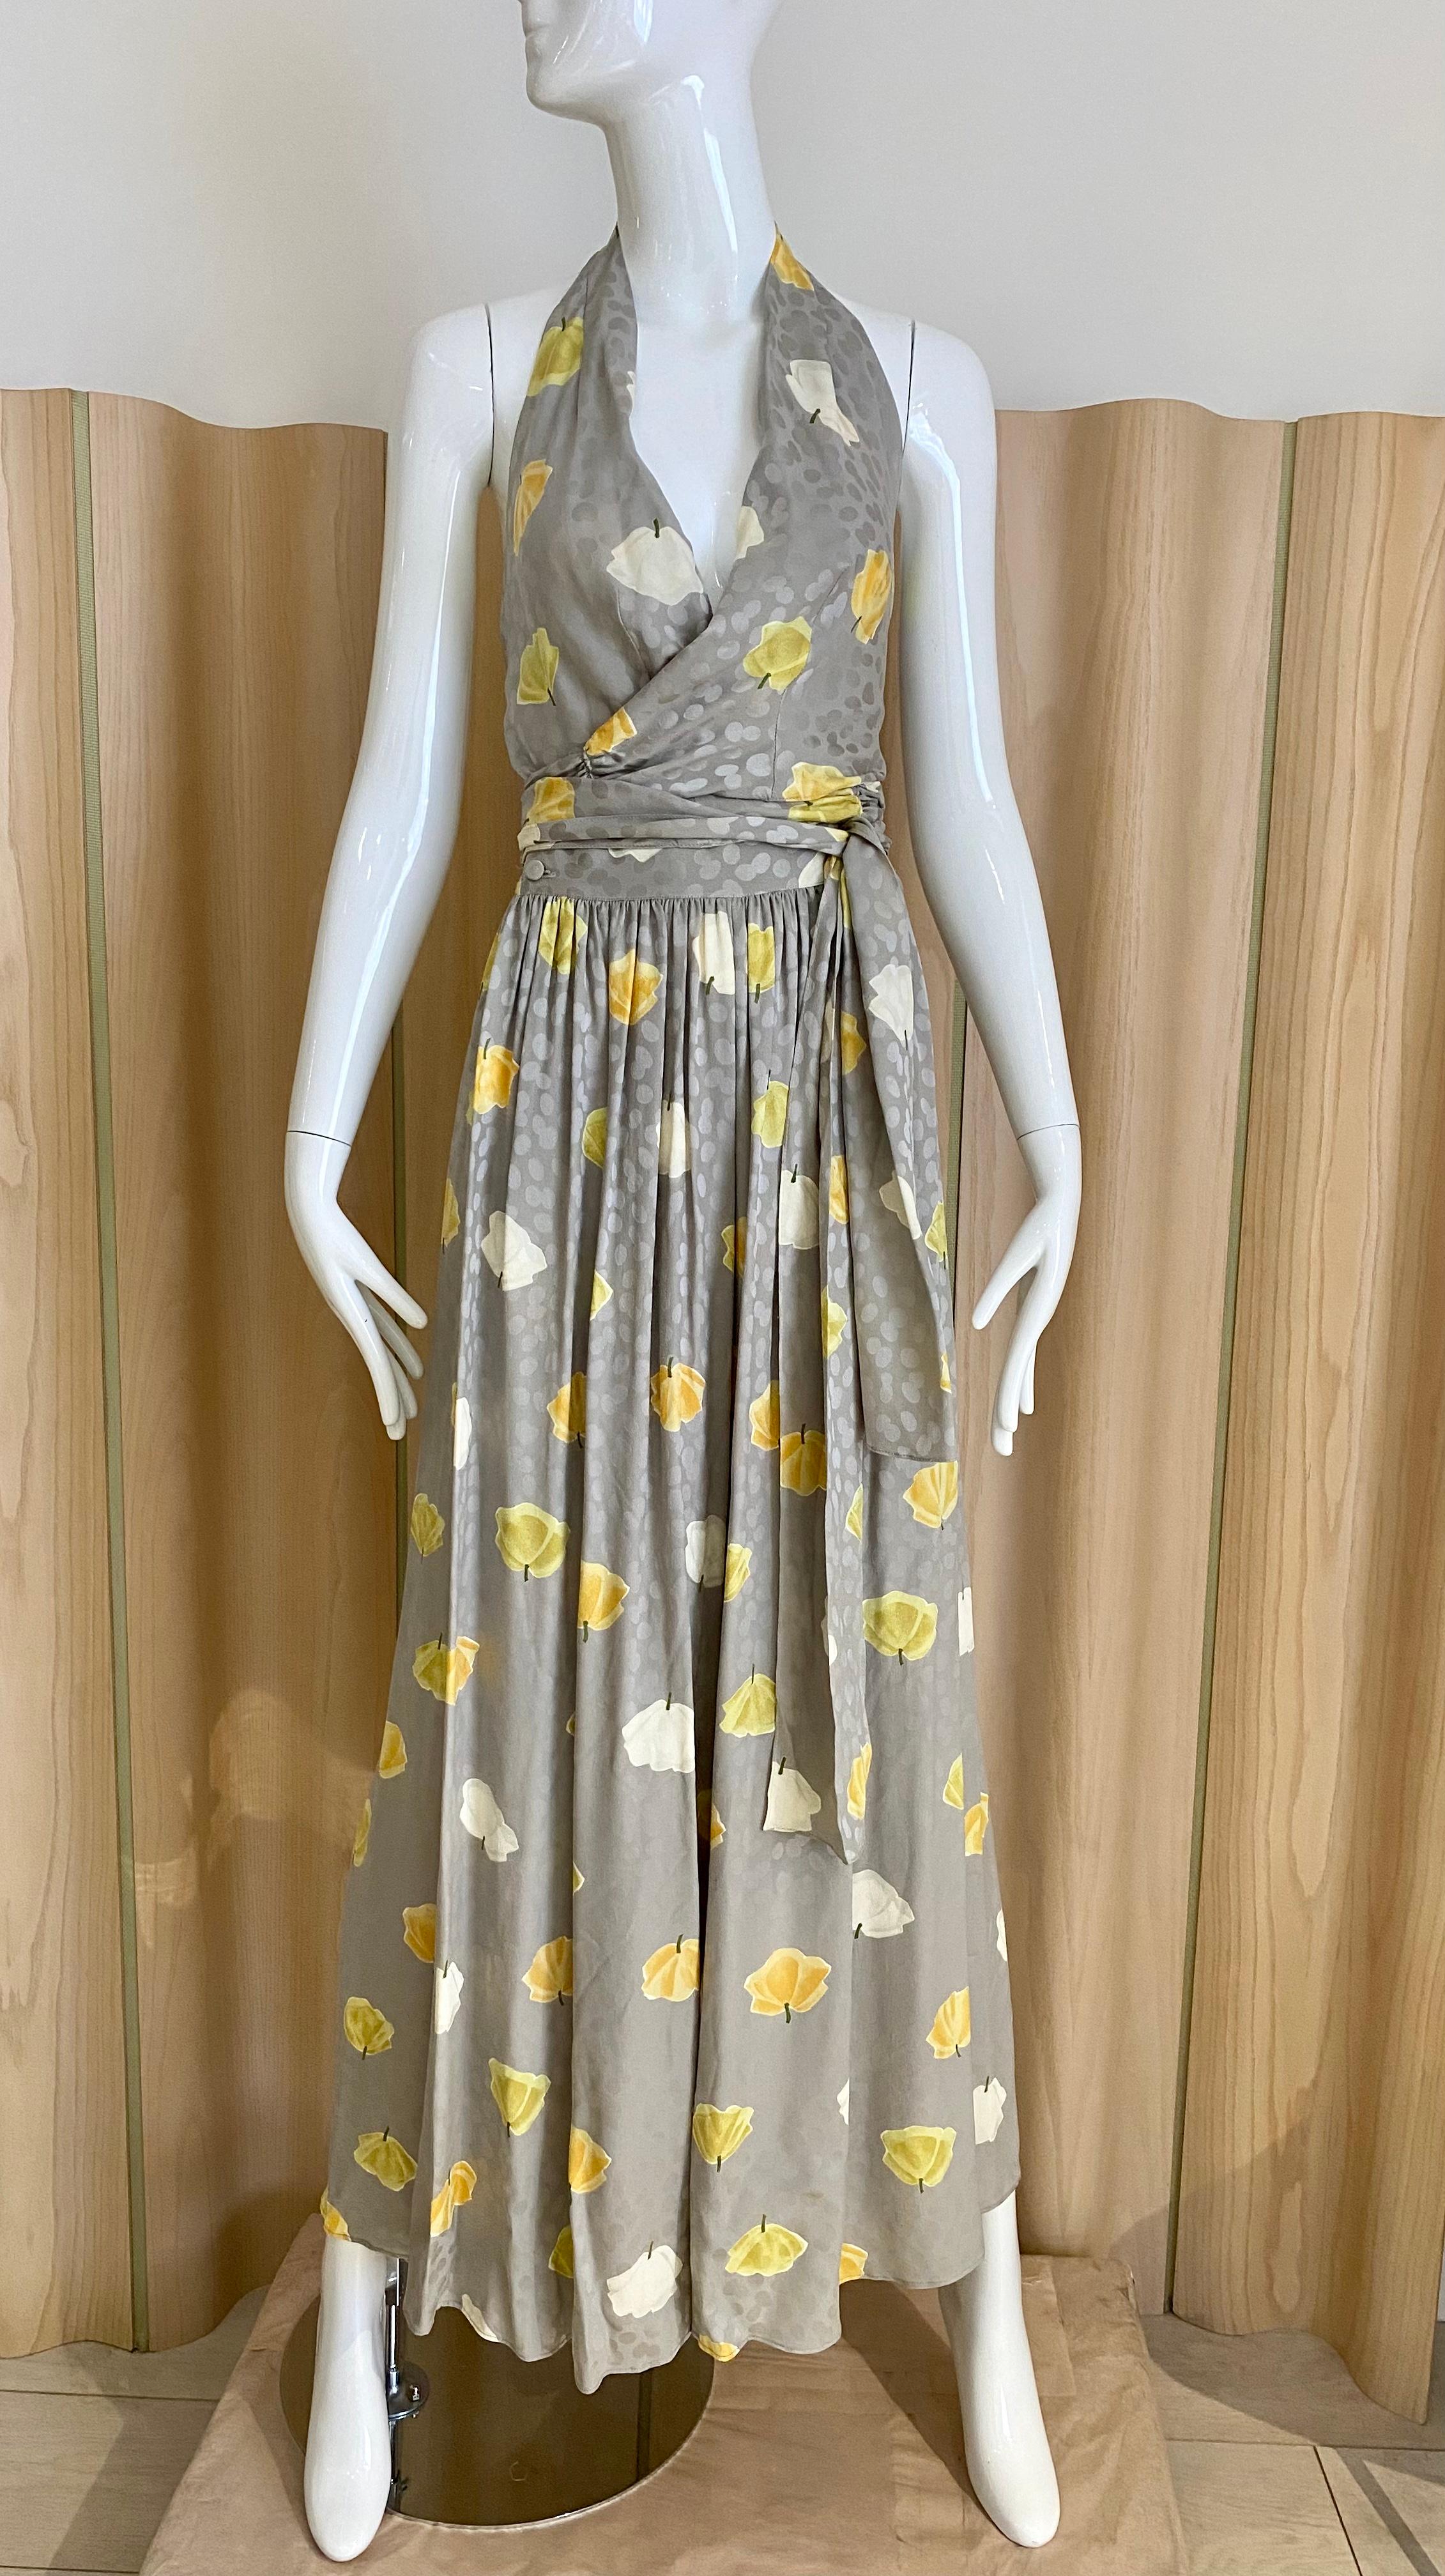 1970s Adele Simpson Grey Silk Floral print in Yellow and white.
Halter silk top with wide leg pants. The set comes with beautiful large silk fringe shawl. Perfect for Summer cocktail party or wedding rehearsal.
Size : 2/4 Small
Measurement: 
Halter